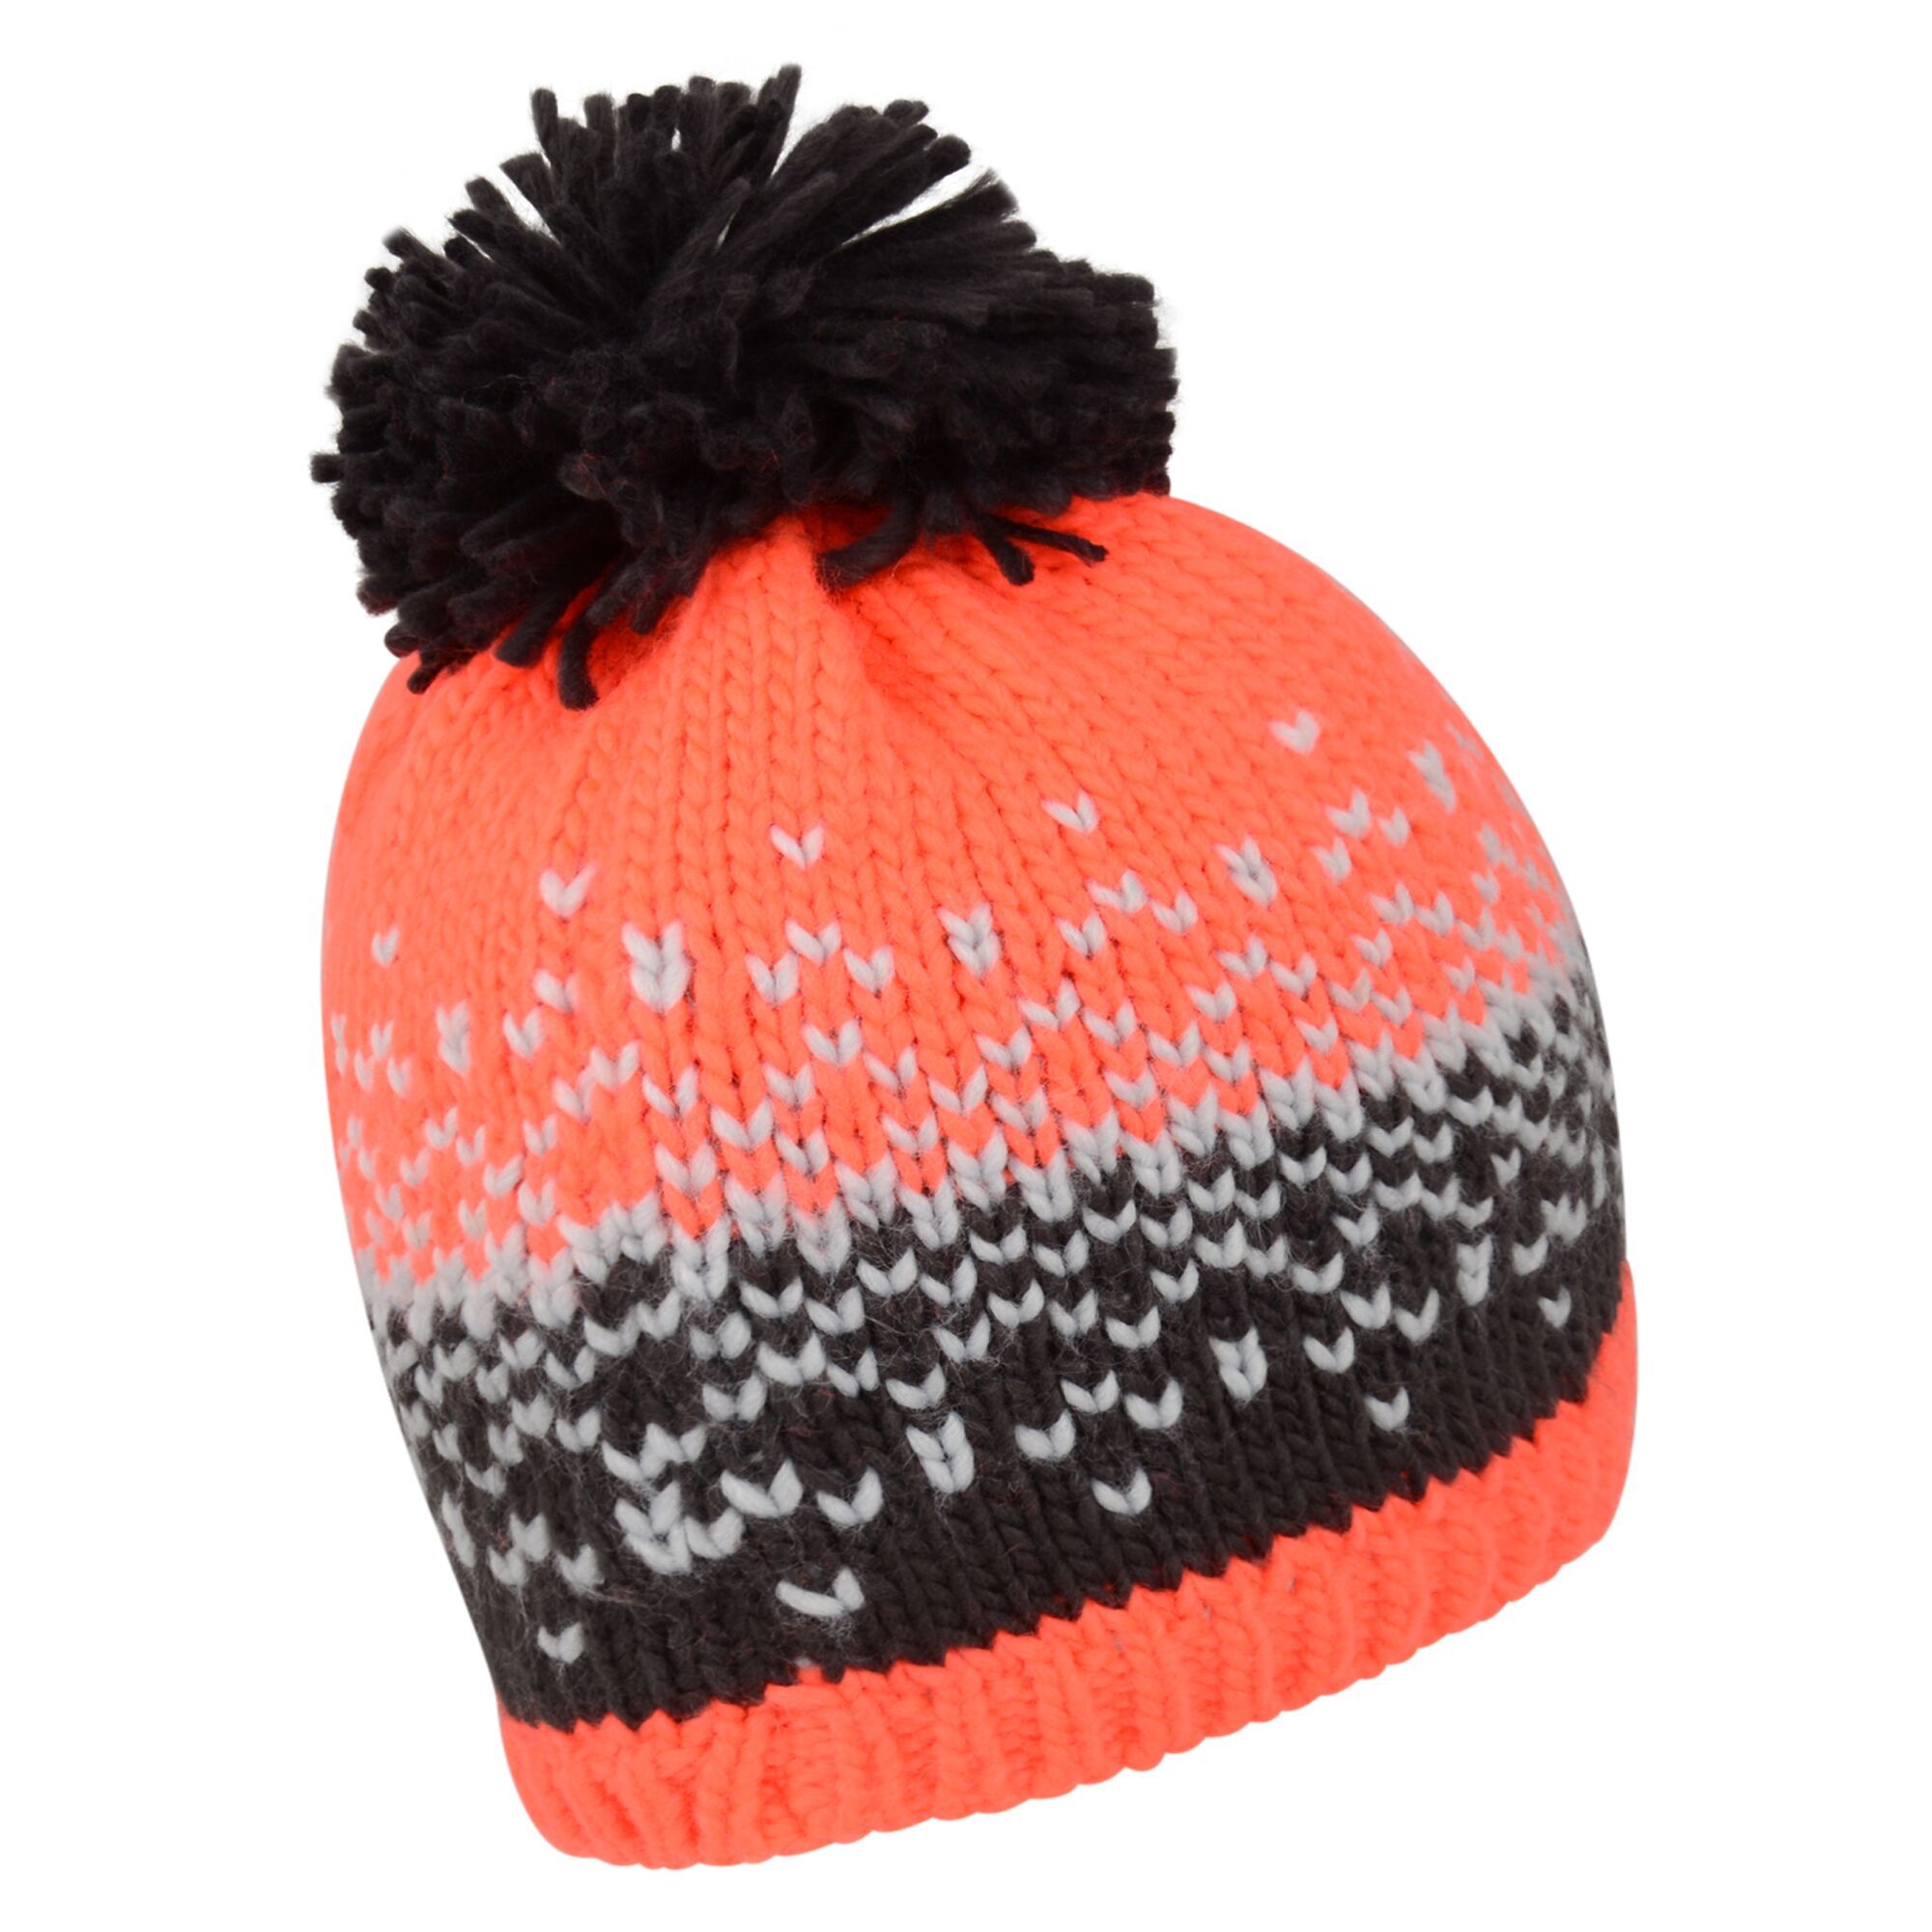 Material: acrylic: 100%. Soft knit construction. Fleece lining. Bobble detail.